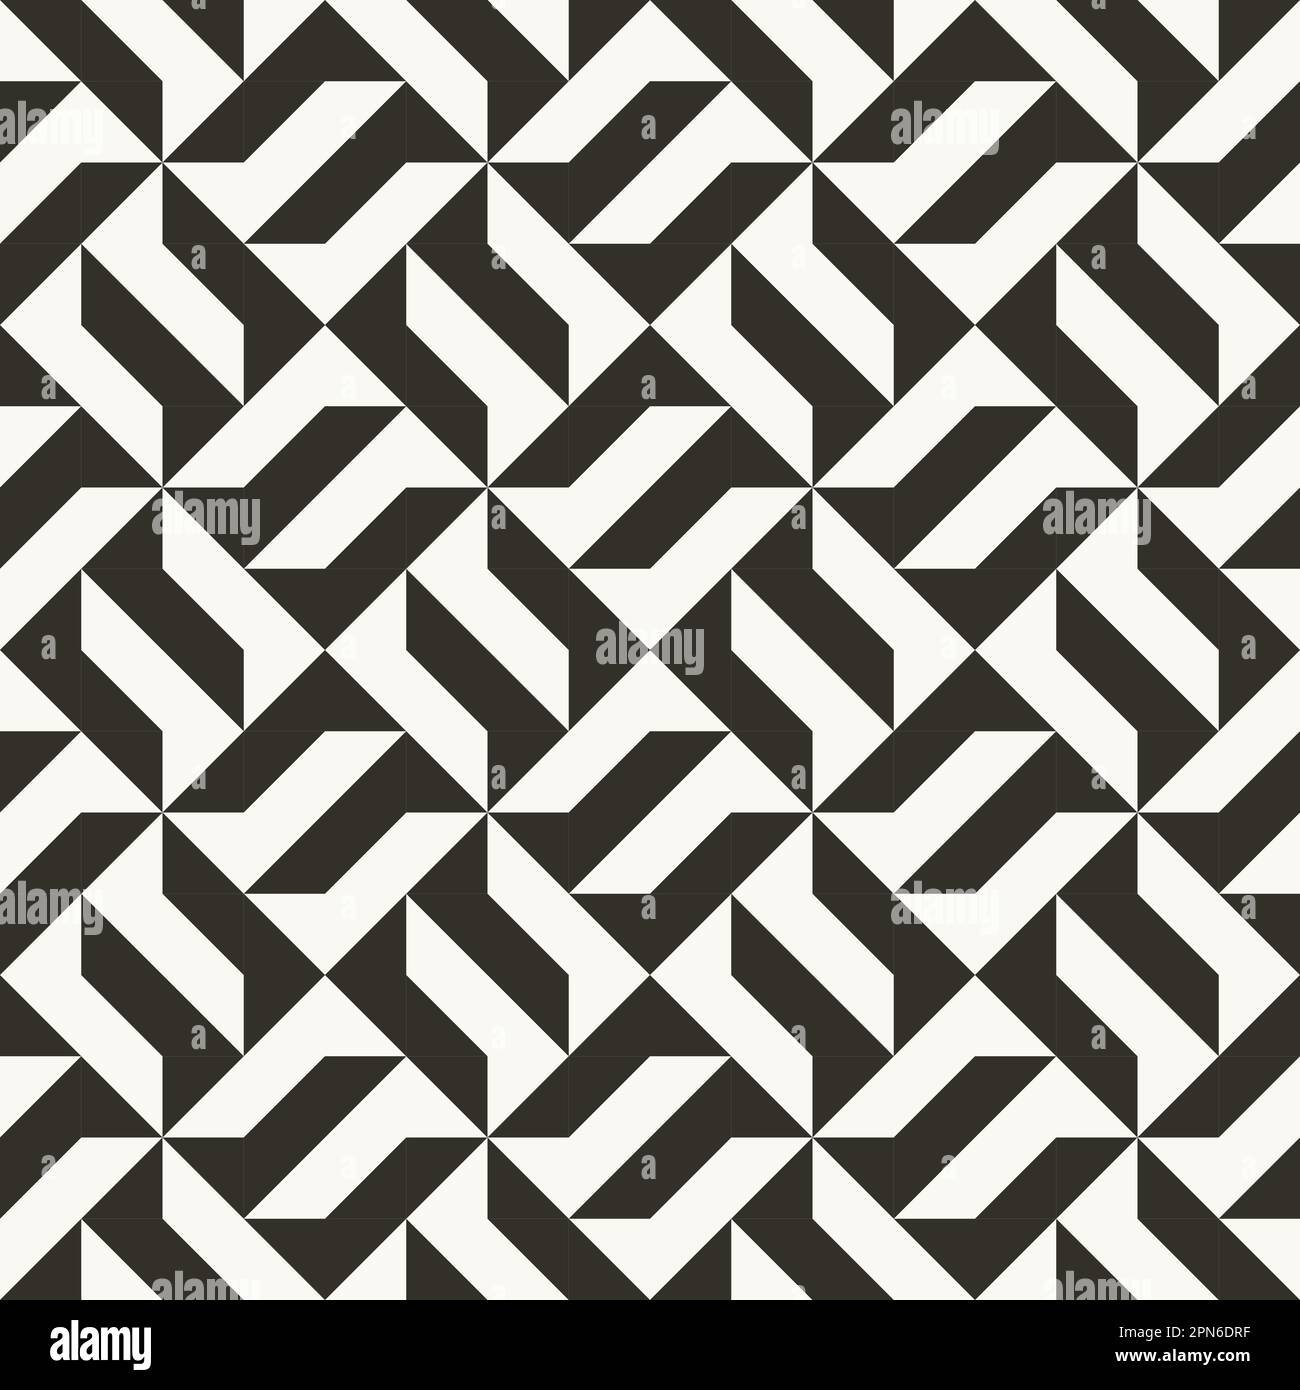 Geometric abstract black and white Stock Vector Images - Alamy